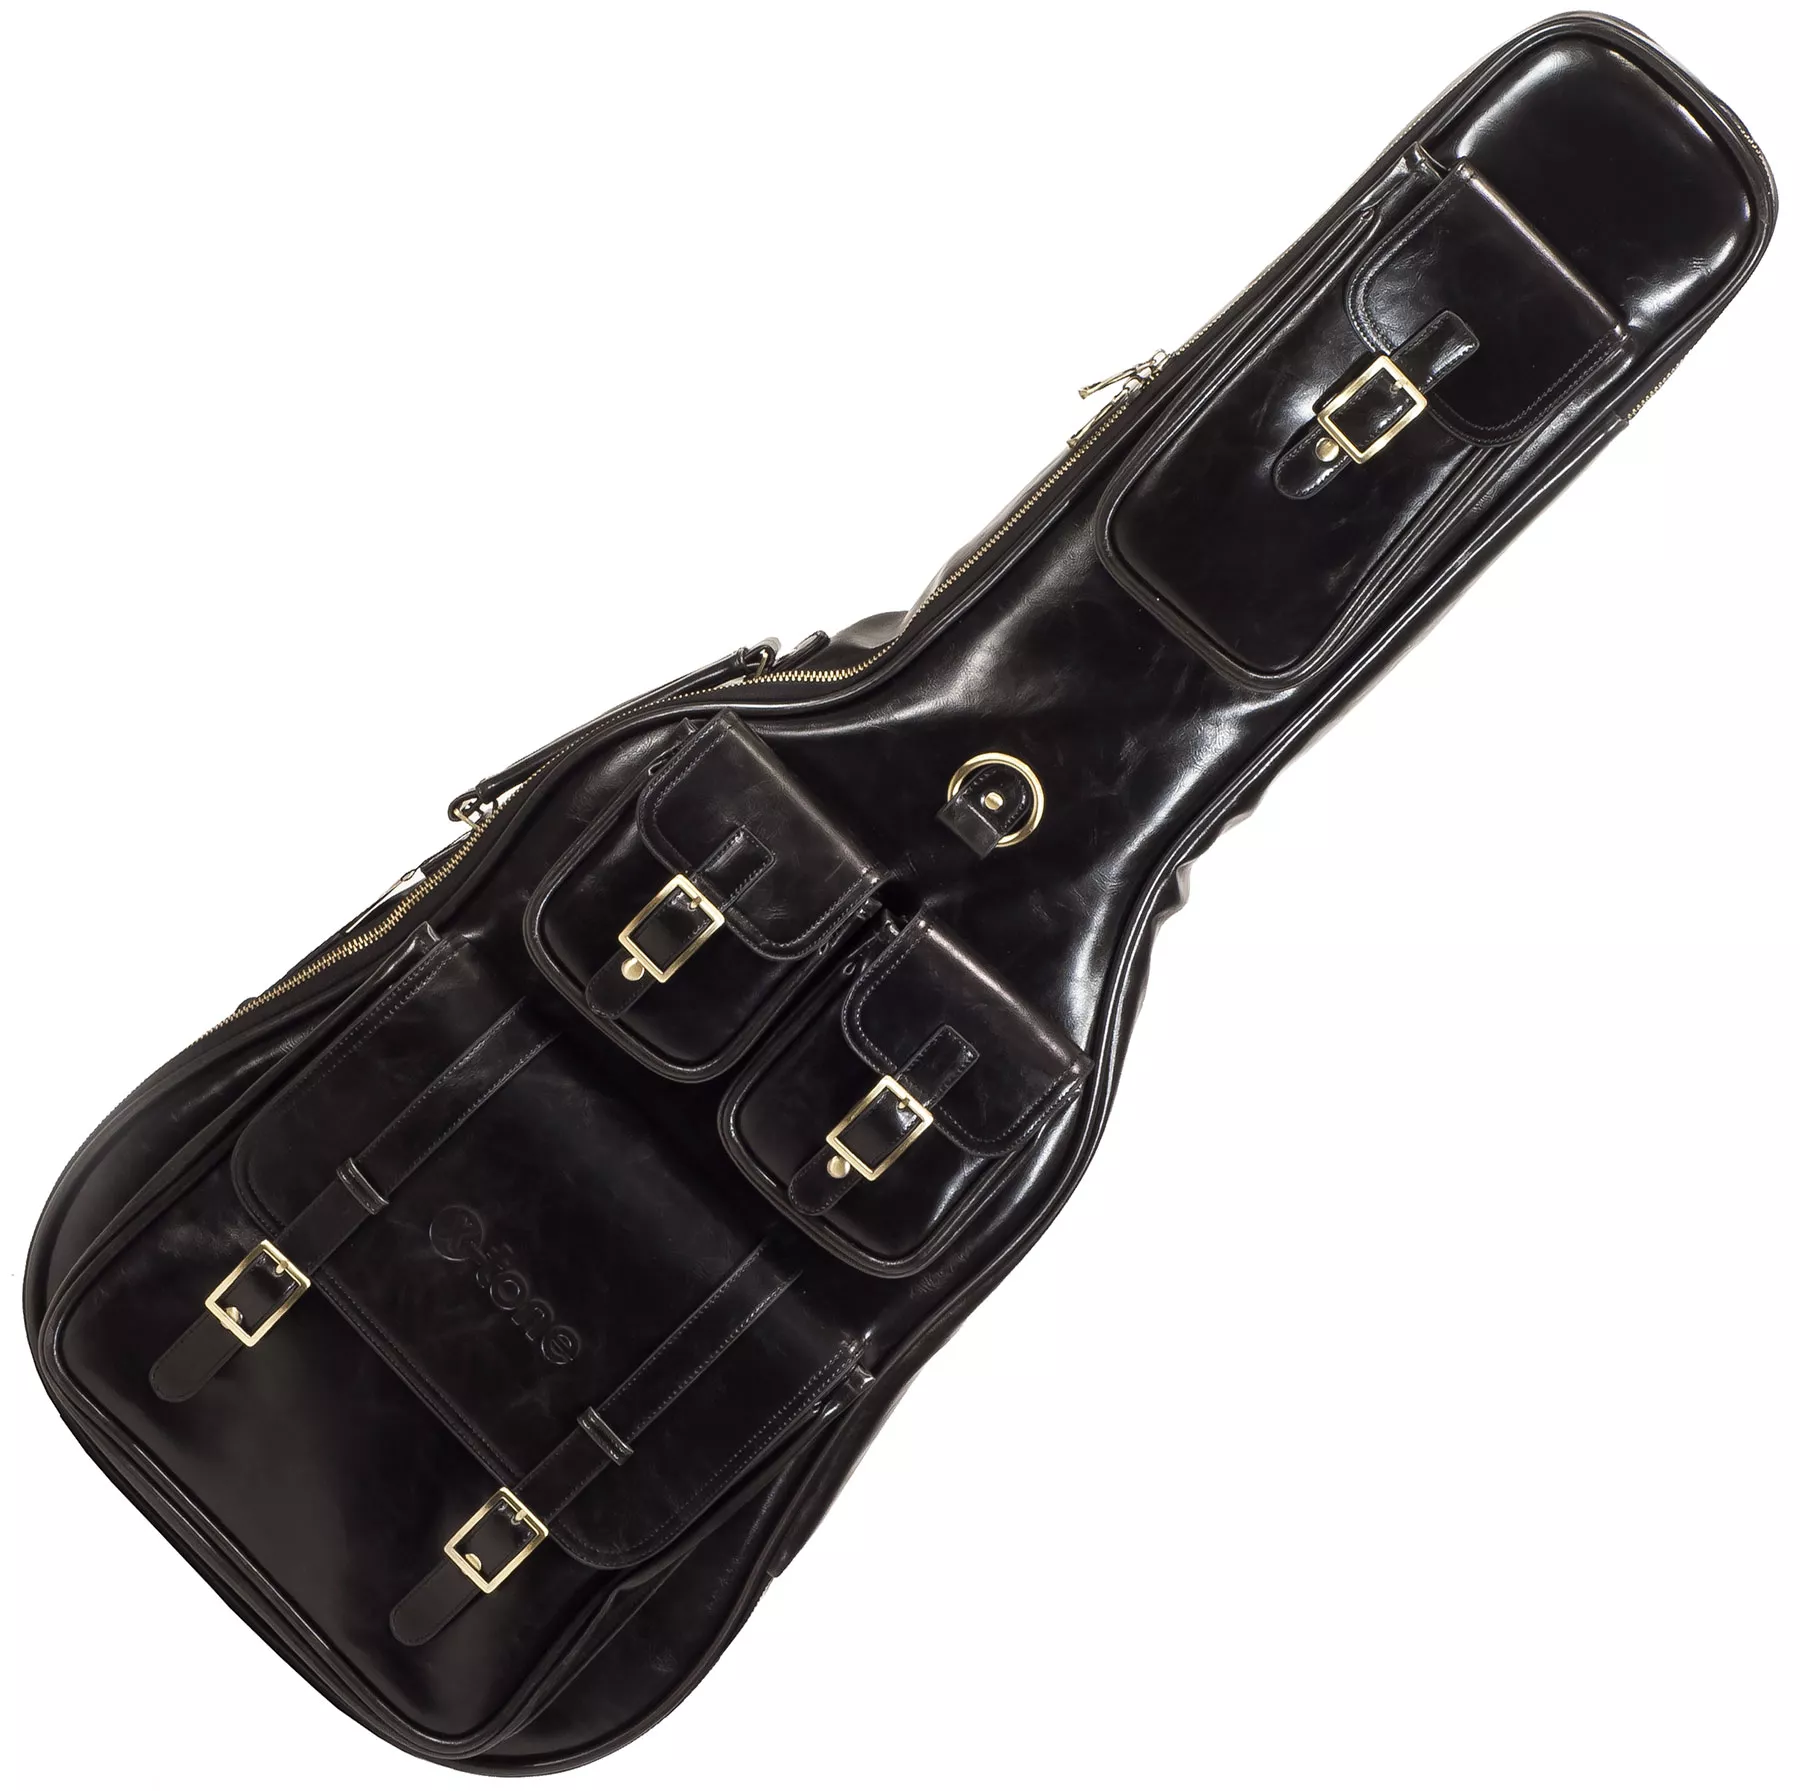 Buy XA-Series Acoustic Guitar Bag with Neck Support | Kadence.in